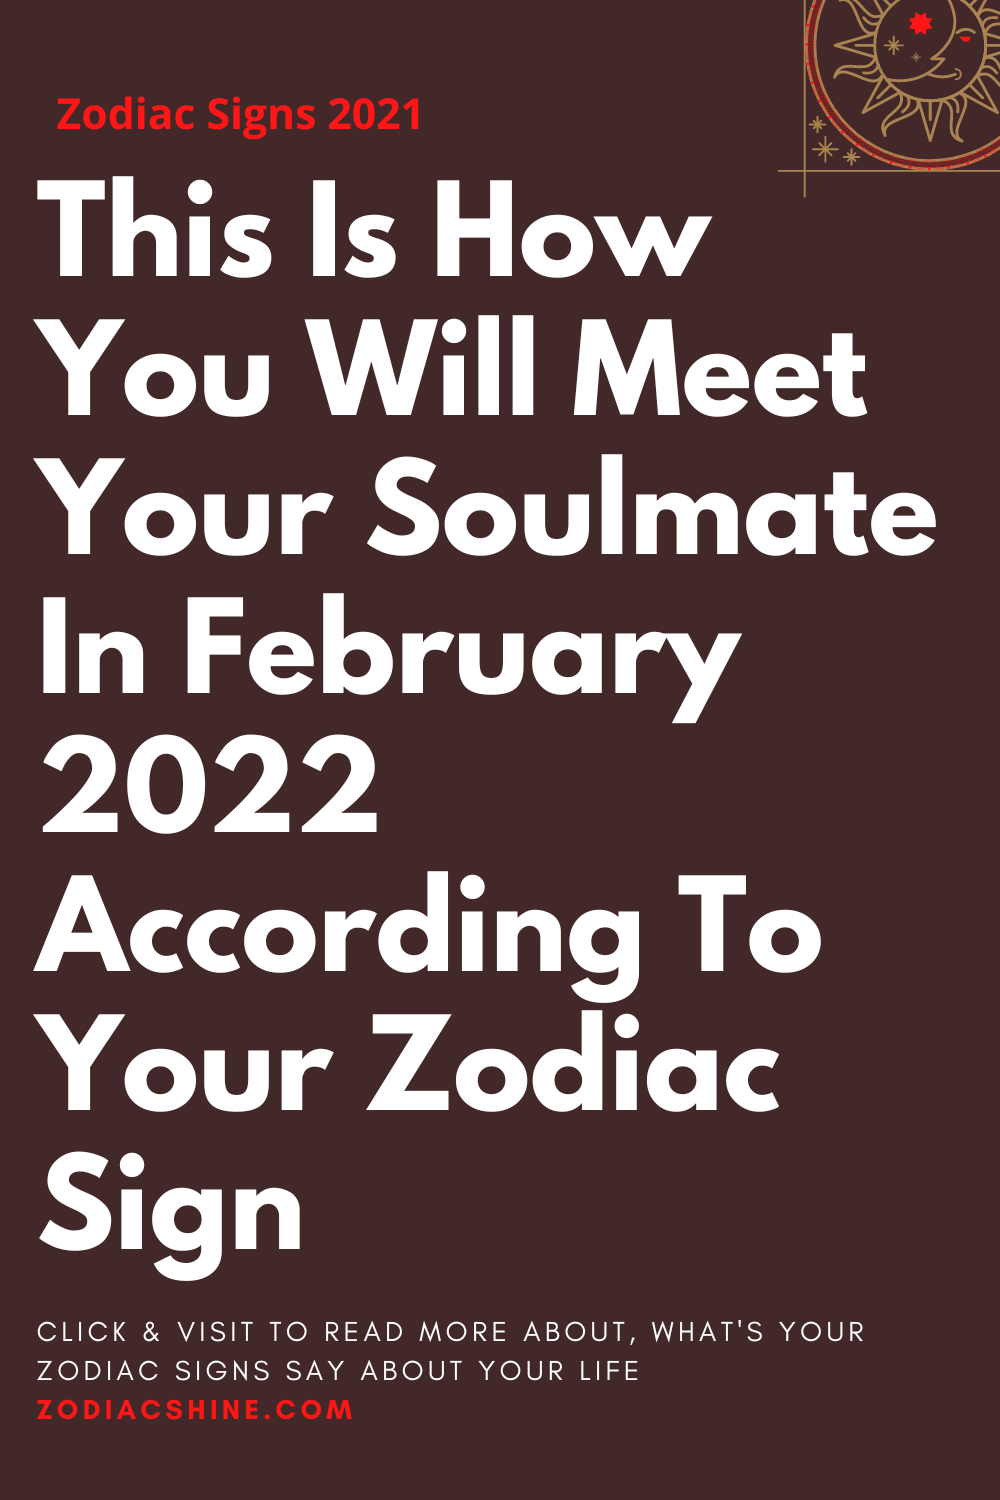 This Is How You Will Meet Your Soulmate In February 2022 According To Your Zodiac Sign